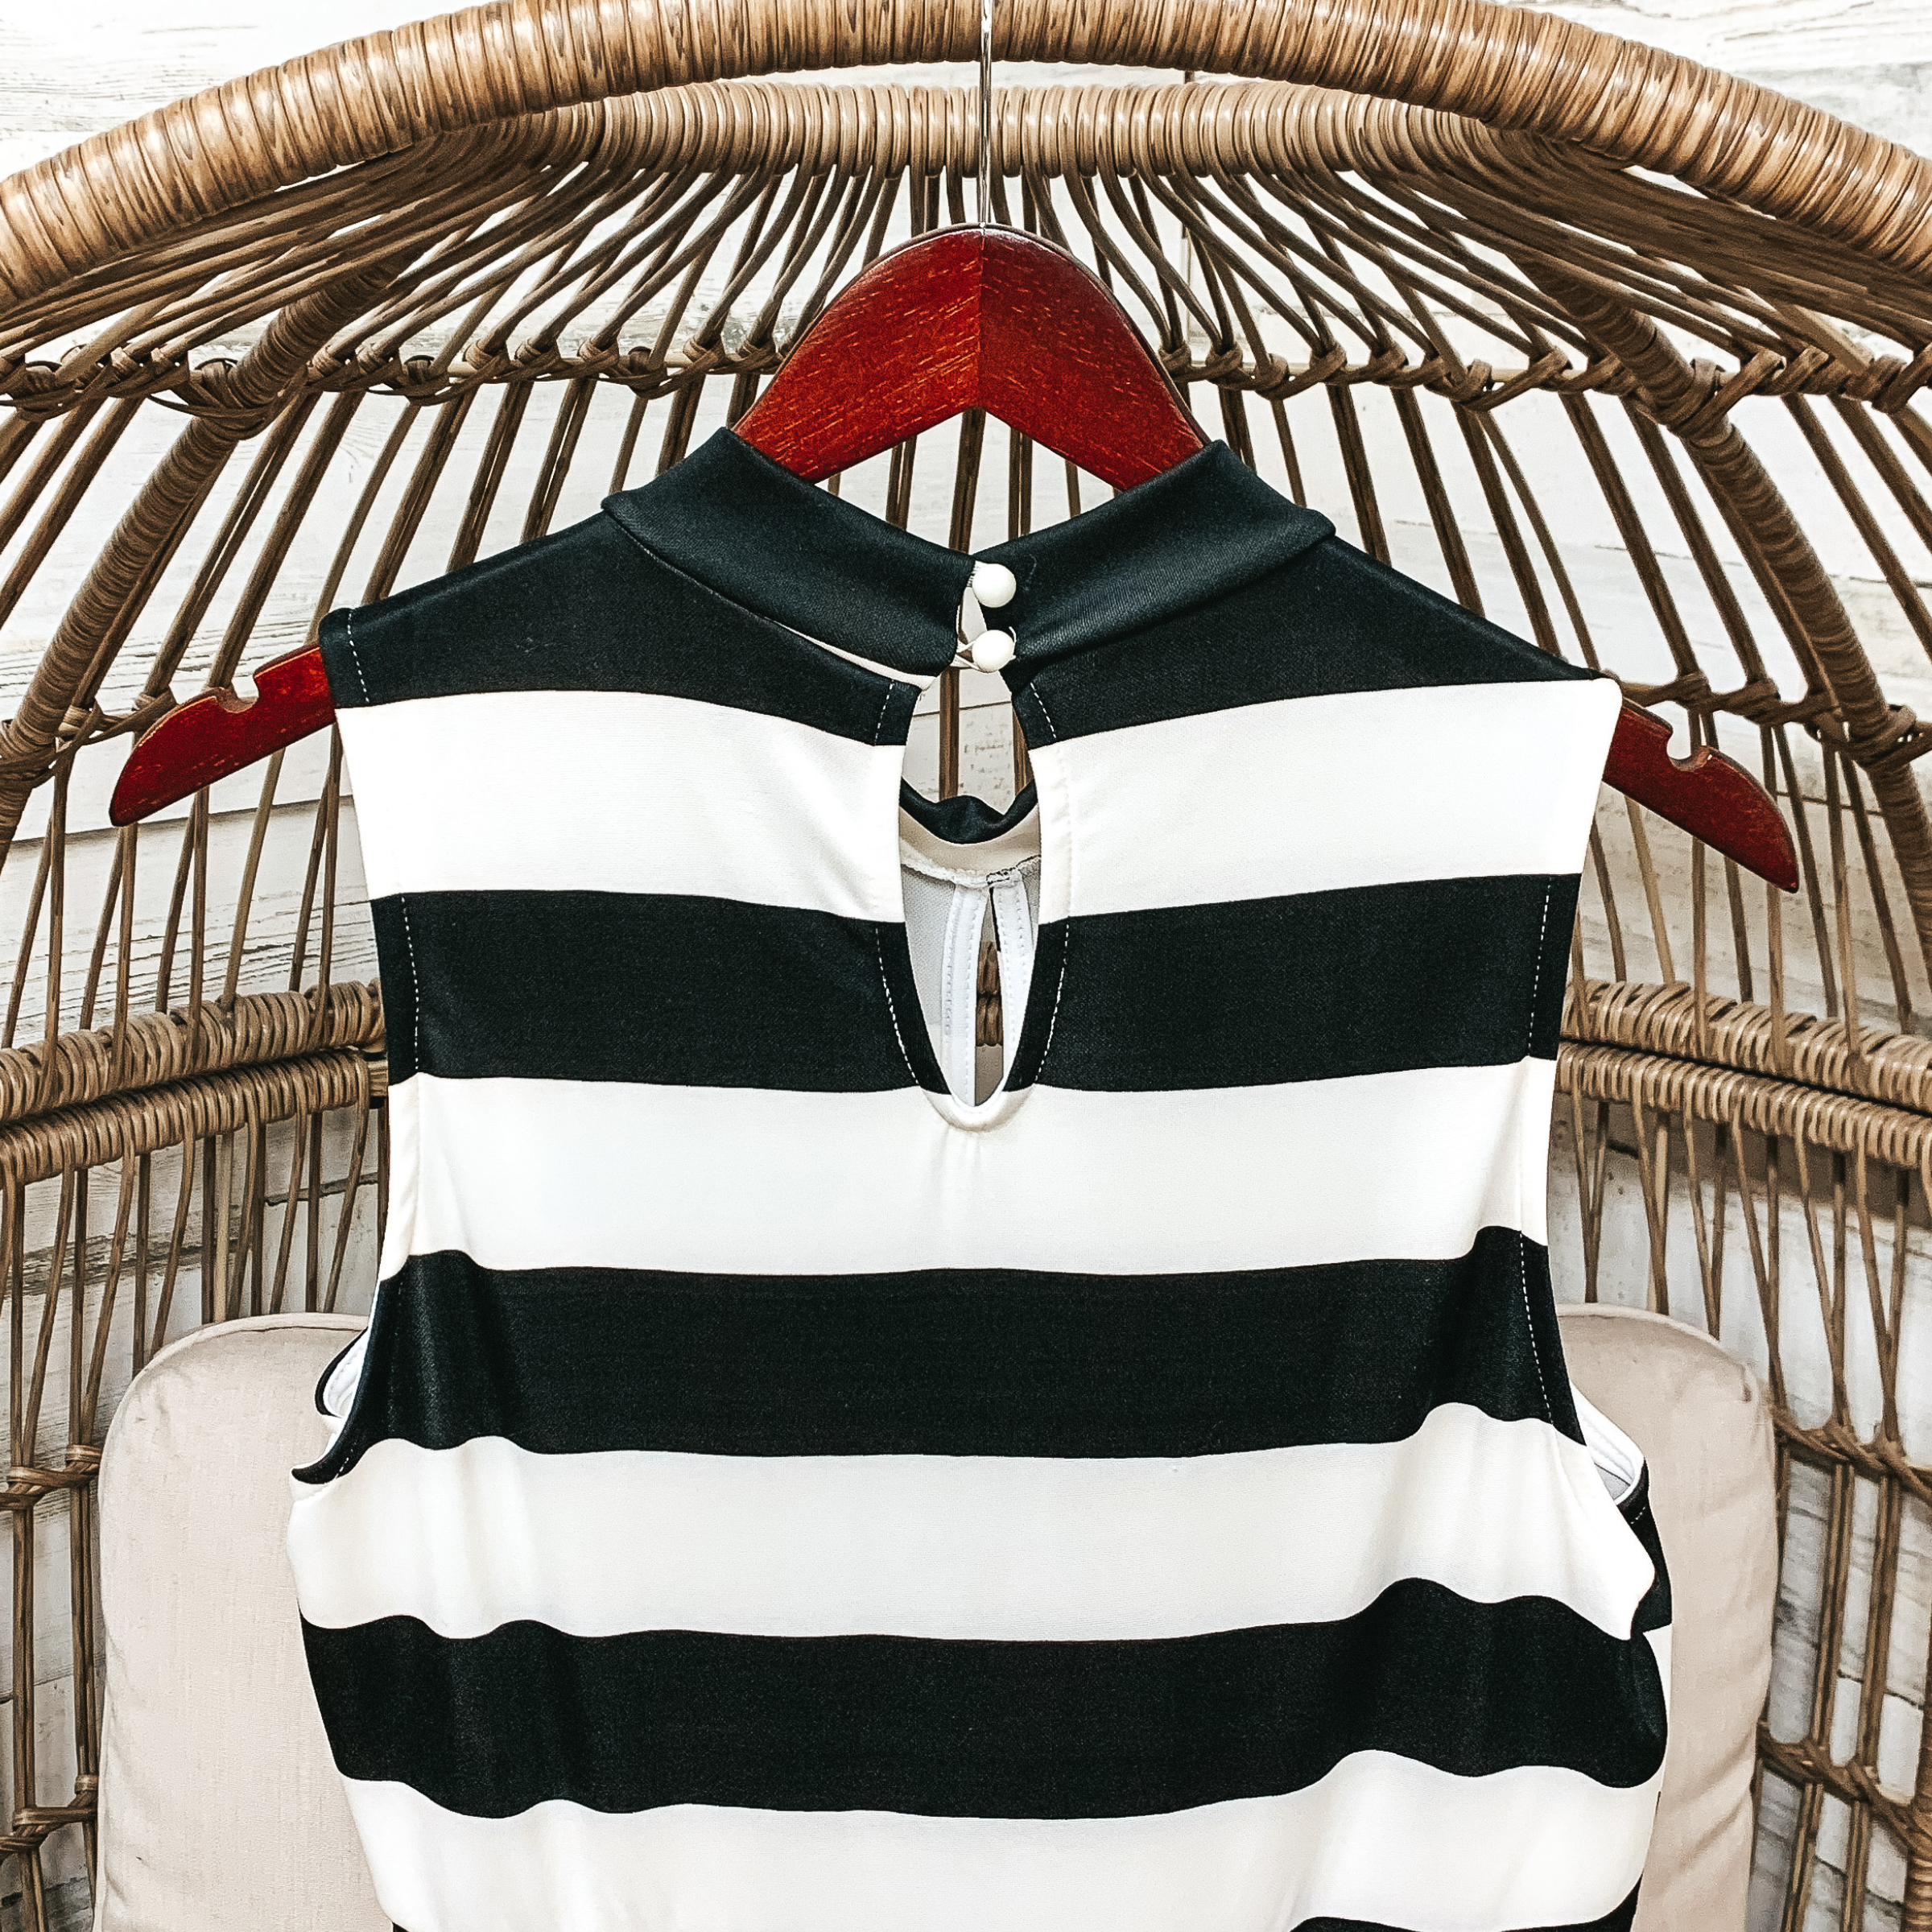 Black and White Striped Dress - Giddy Up Glamour Boutique